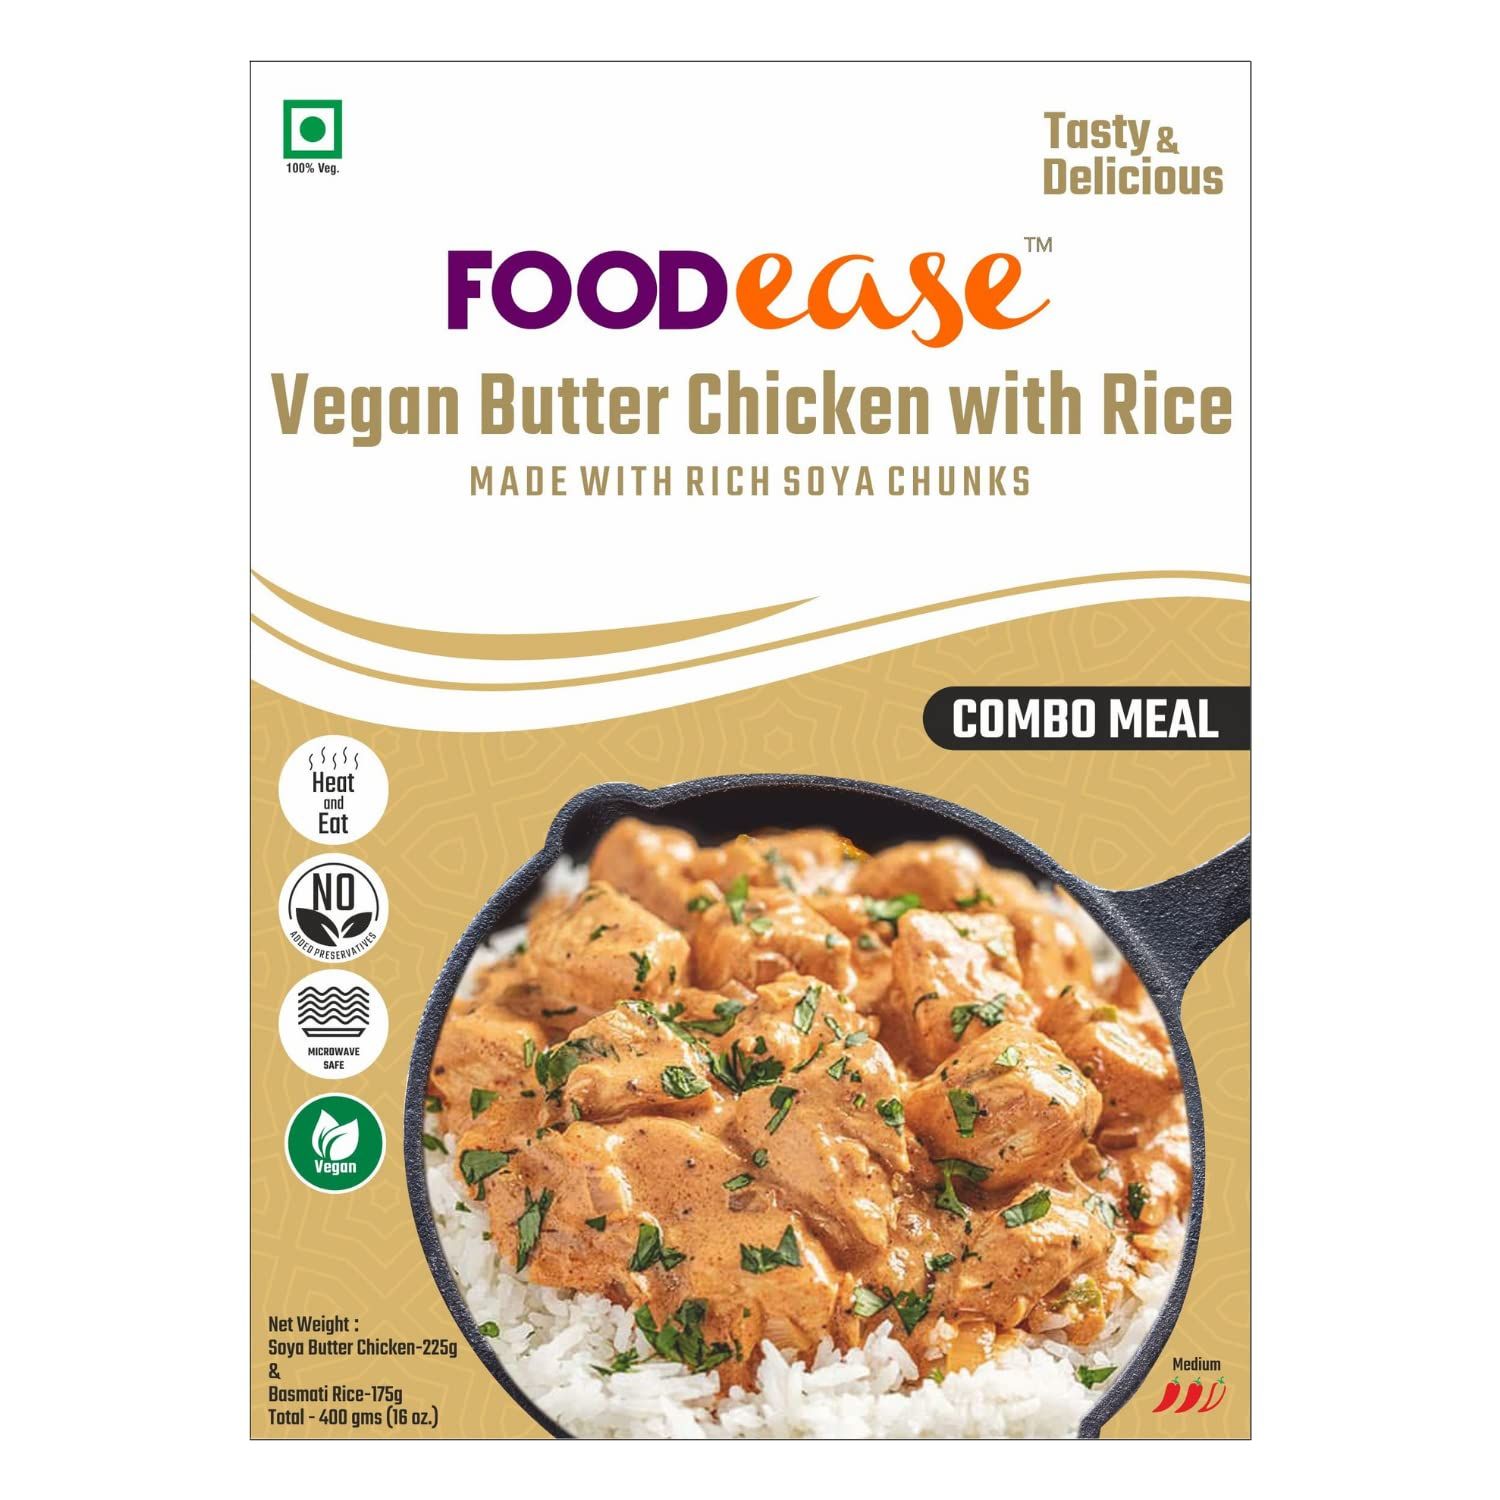 FOODEASE Ready to Eat Vegan Butter Chicken with Rice Image